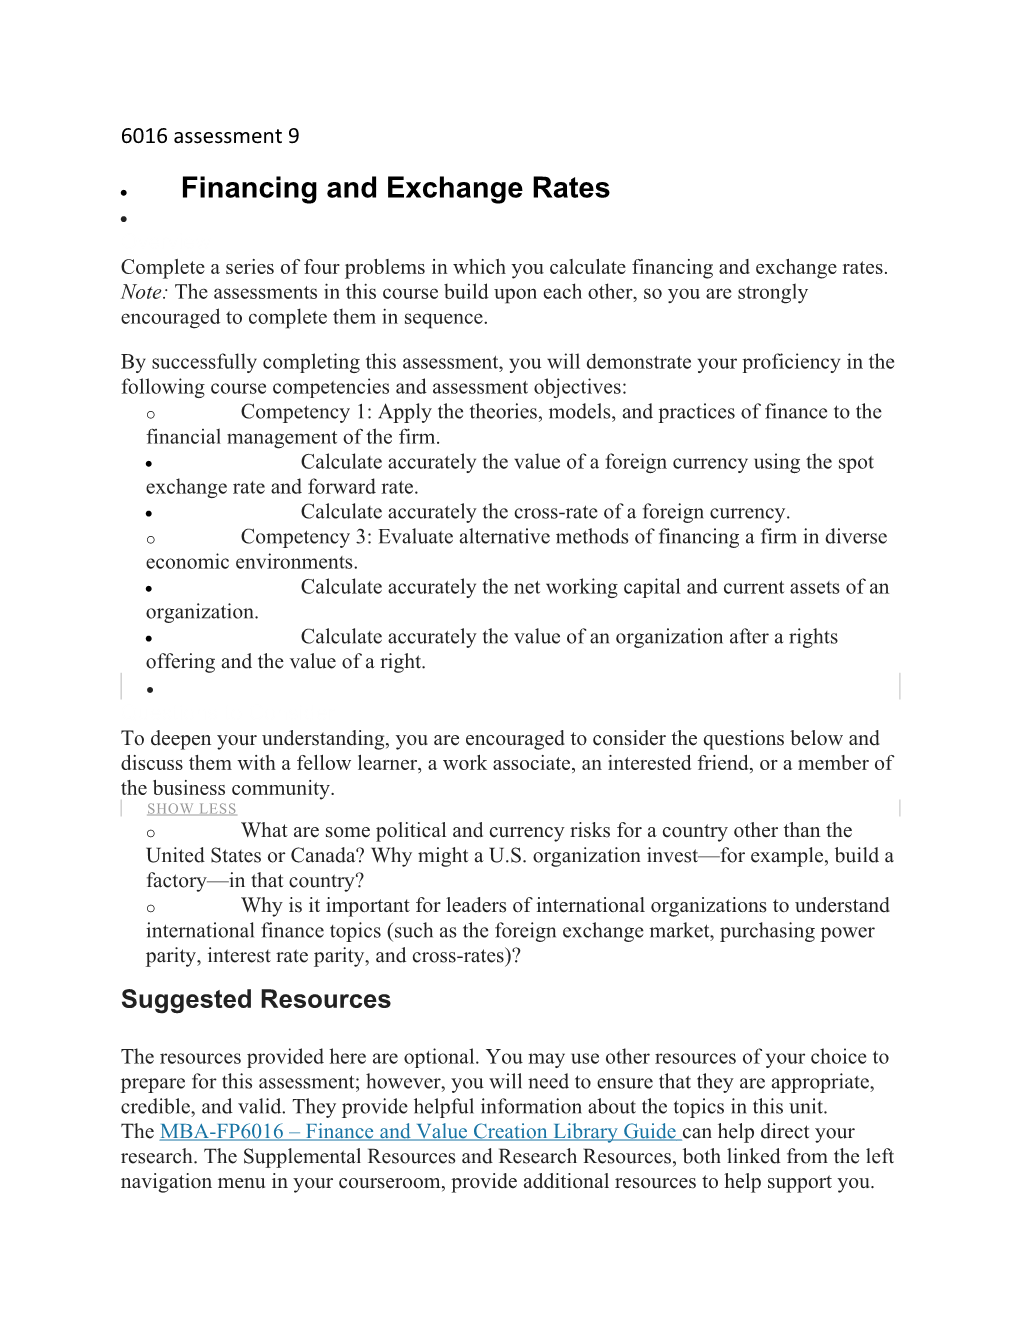 Complete a Series of Four Problems in Which You Calculate Financing and Exchange Rates